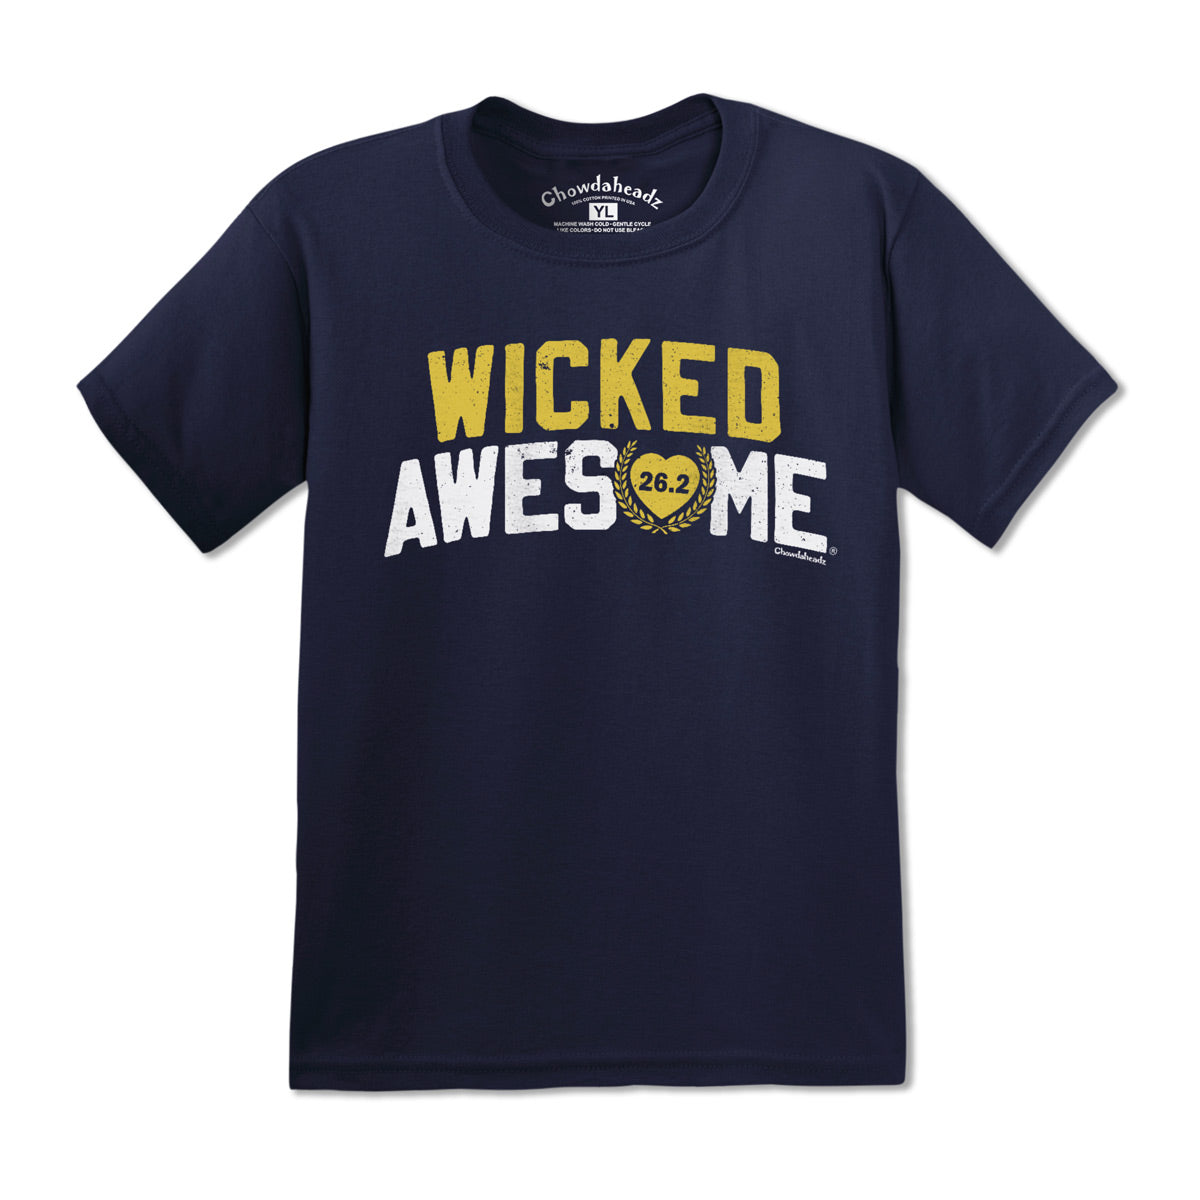 Wicked Awesome 26.2 Heart Youth T-Shirt - Chowdaheadz